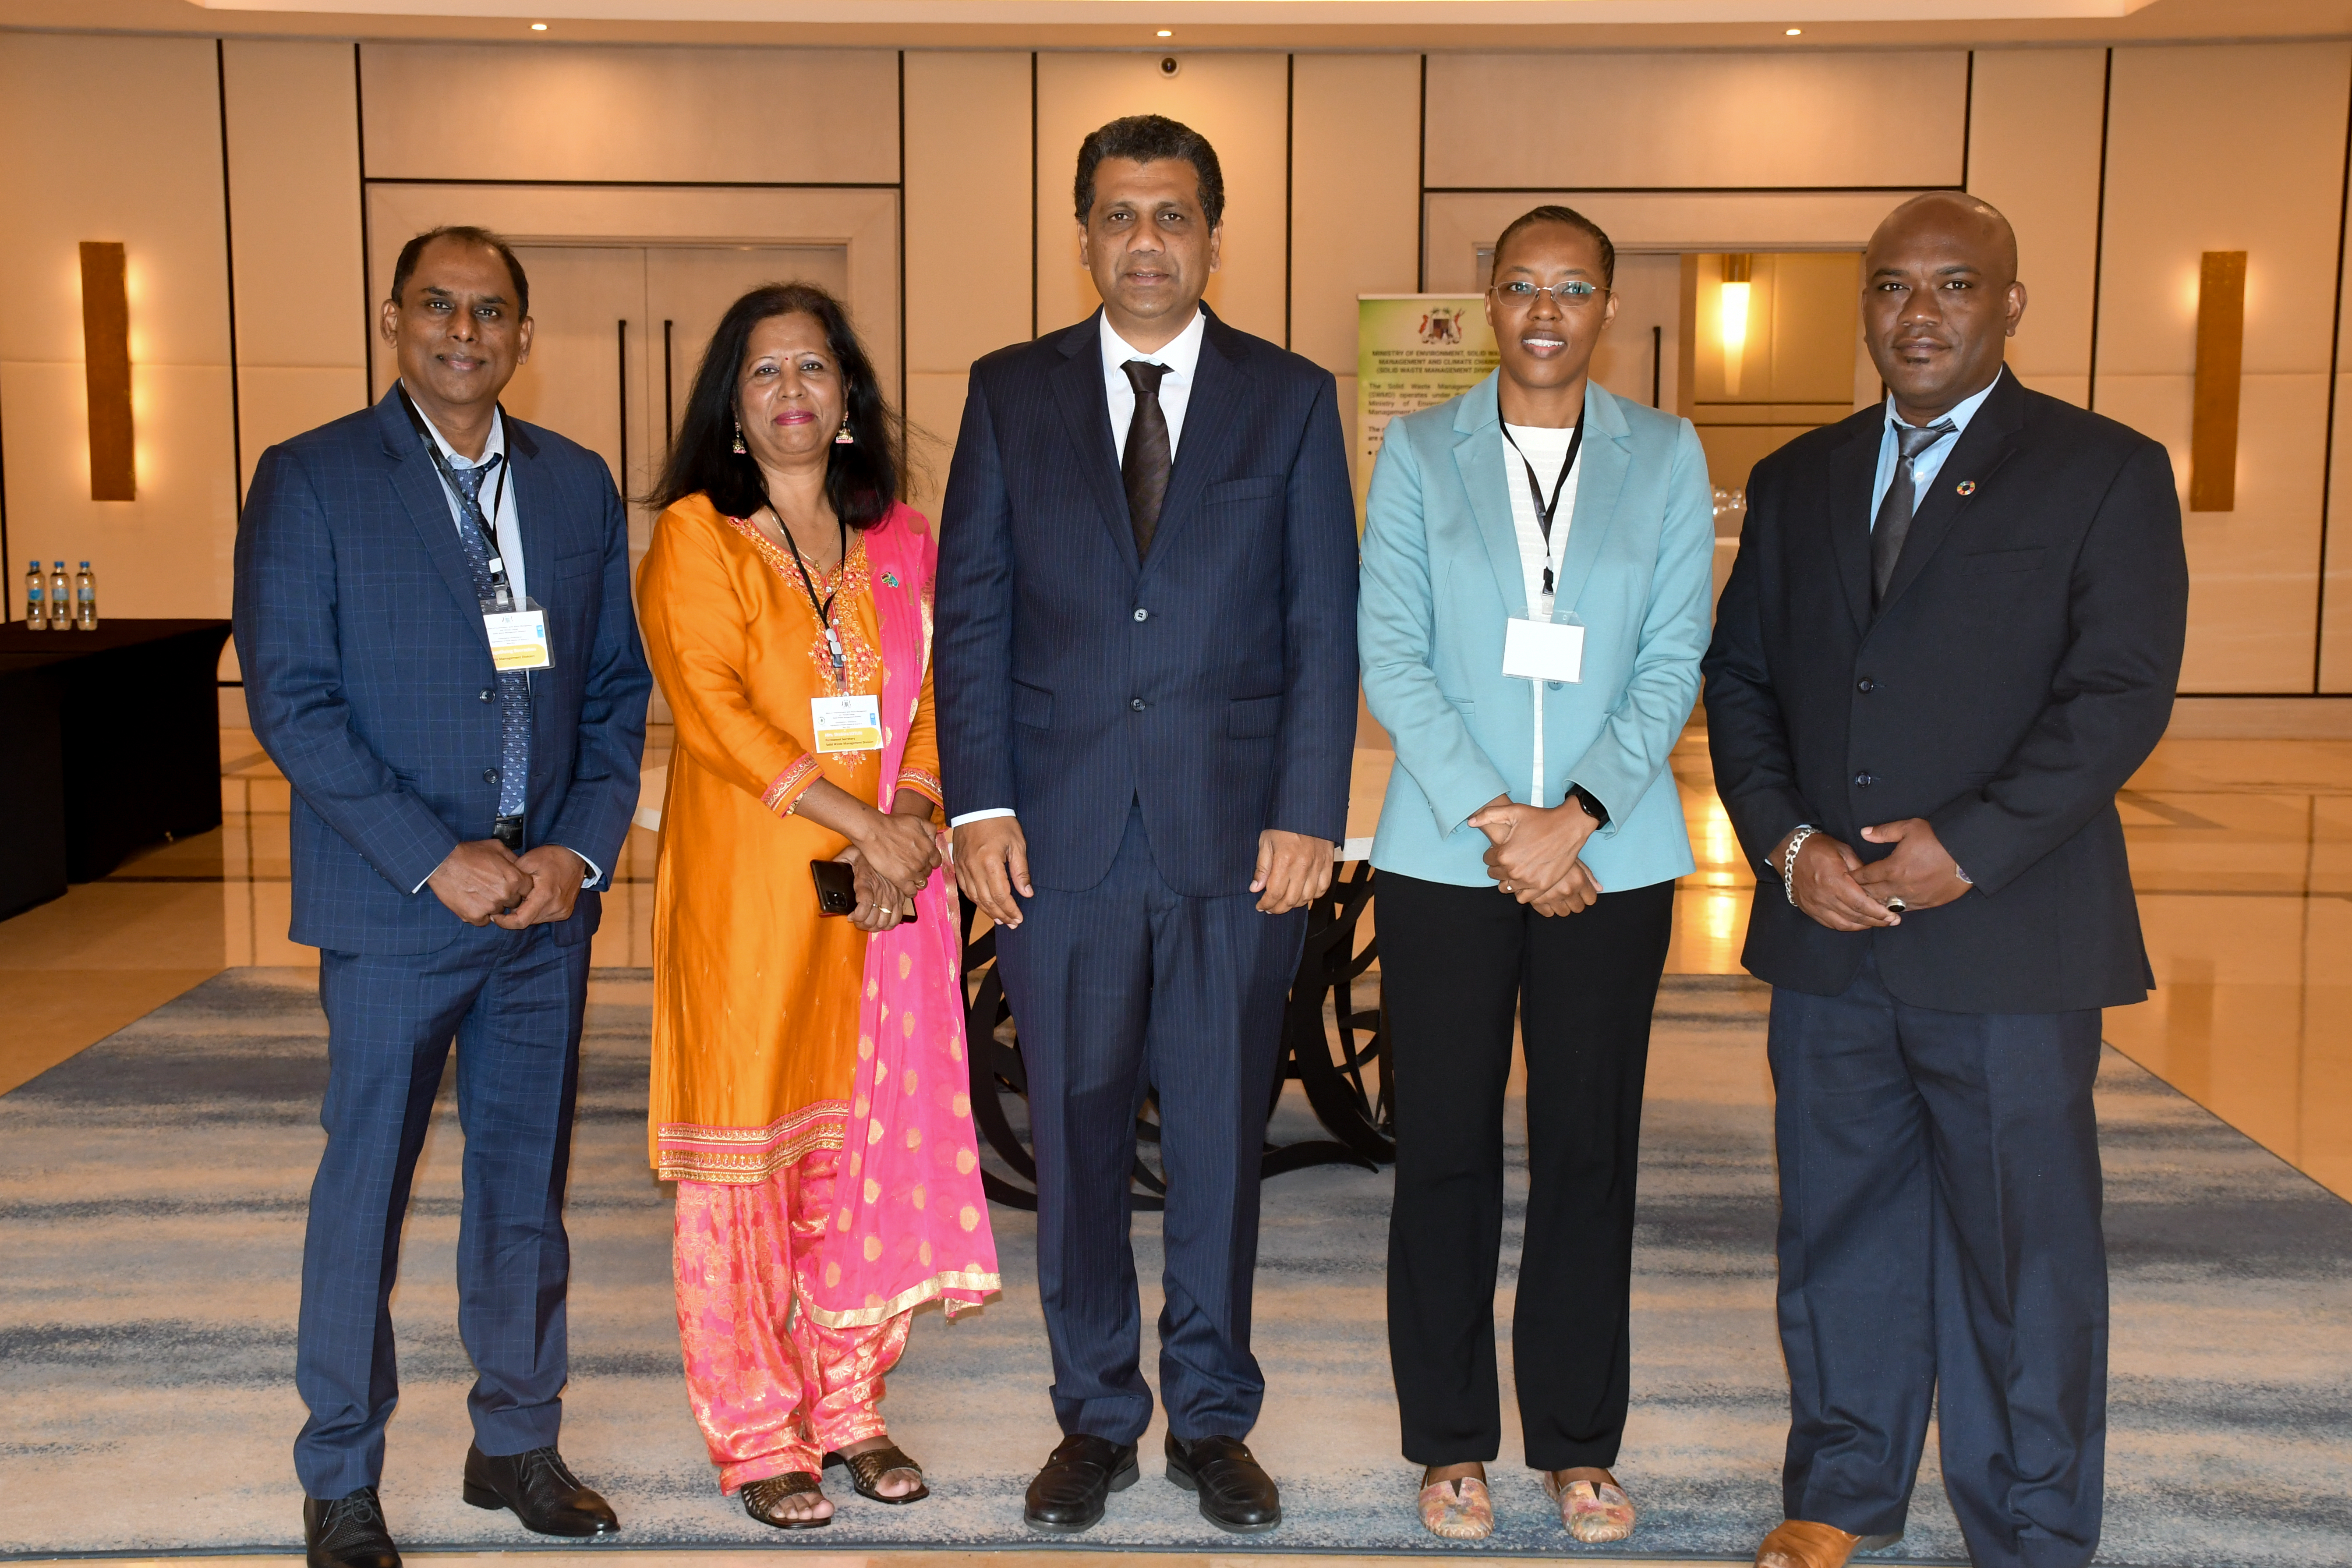  The honourable Kavydass Ramano, Minister of the Environment, Solid Waste Management and Climate Change stressed the global importance of solid waste management, noting its environmental, sanitary, and economic impact.